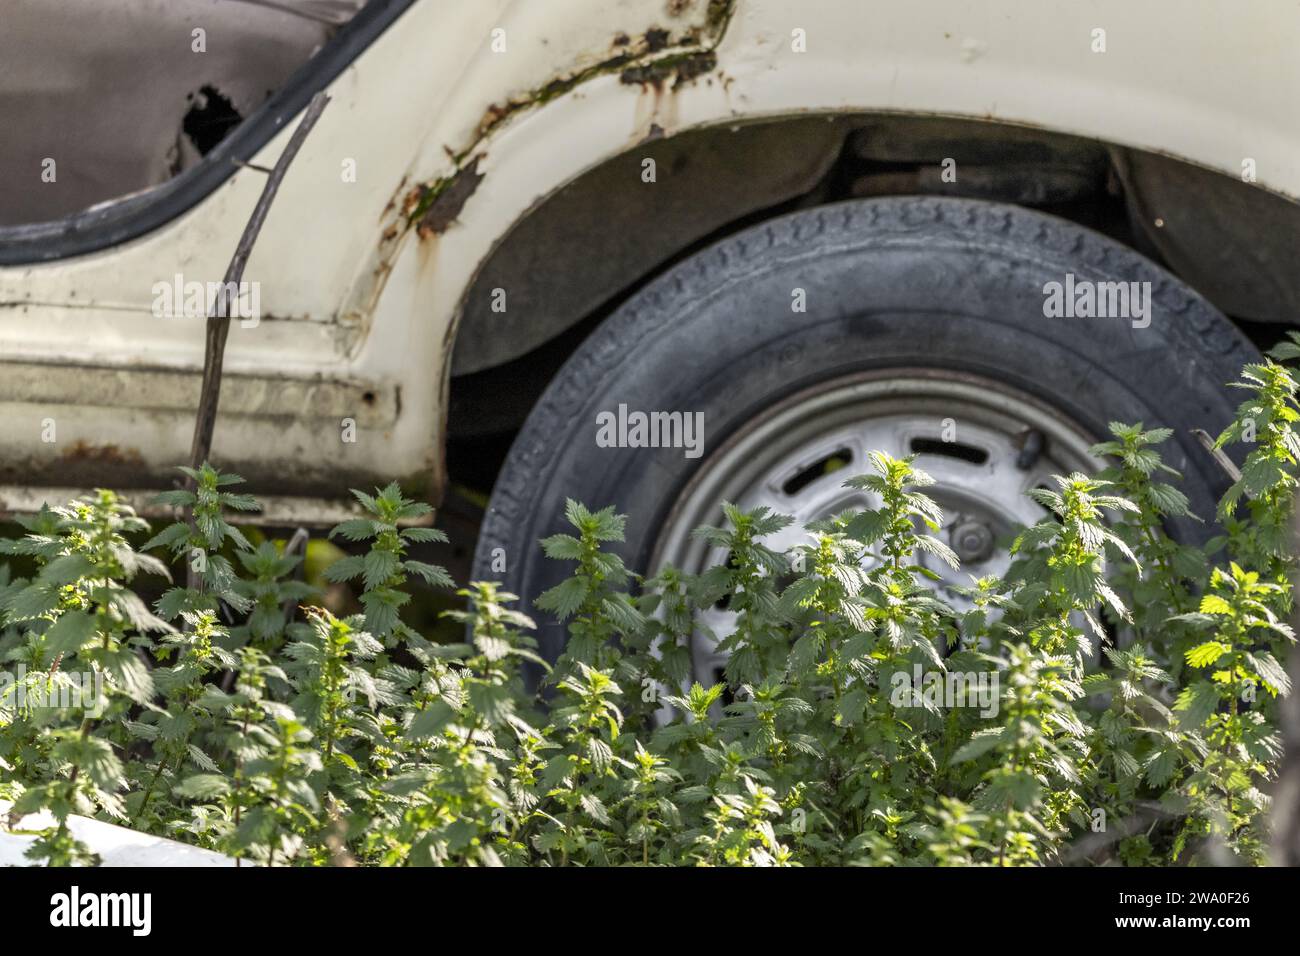 An old abandoned vehicle surrounded by large nettle plants Stock Photo